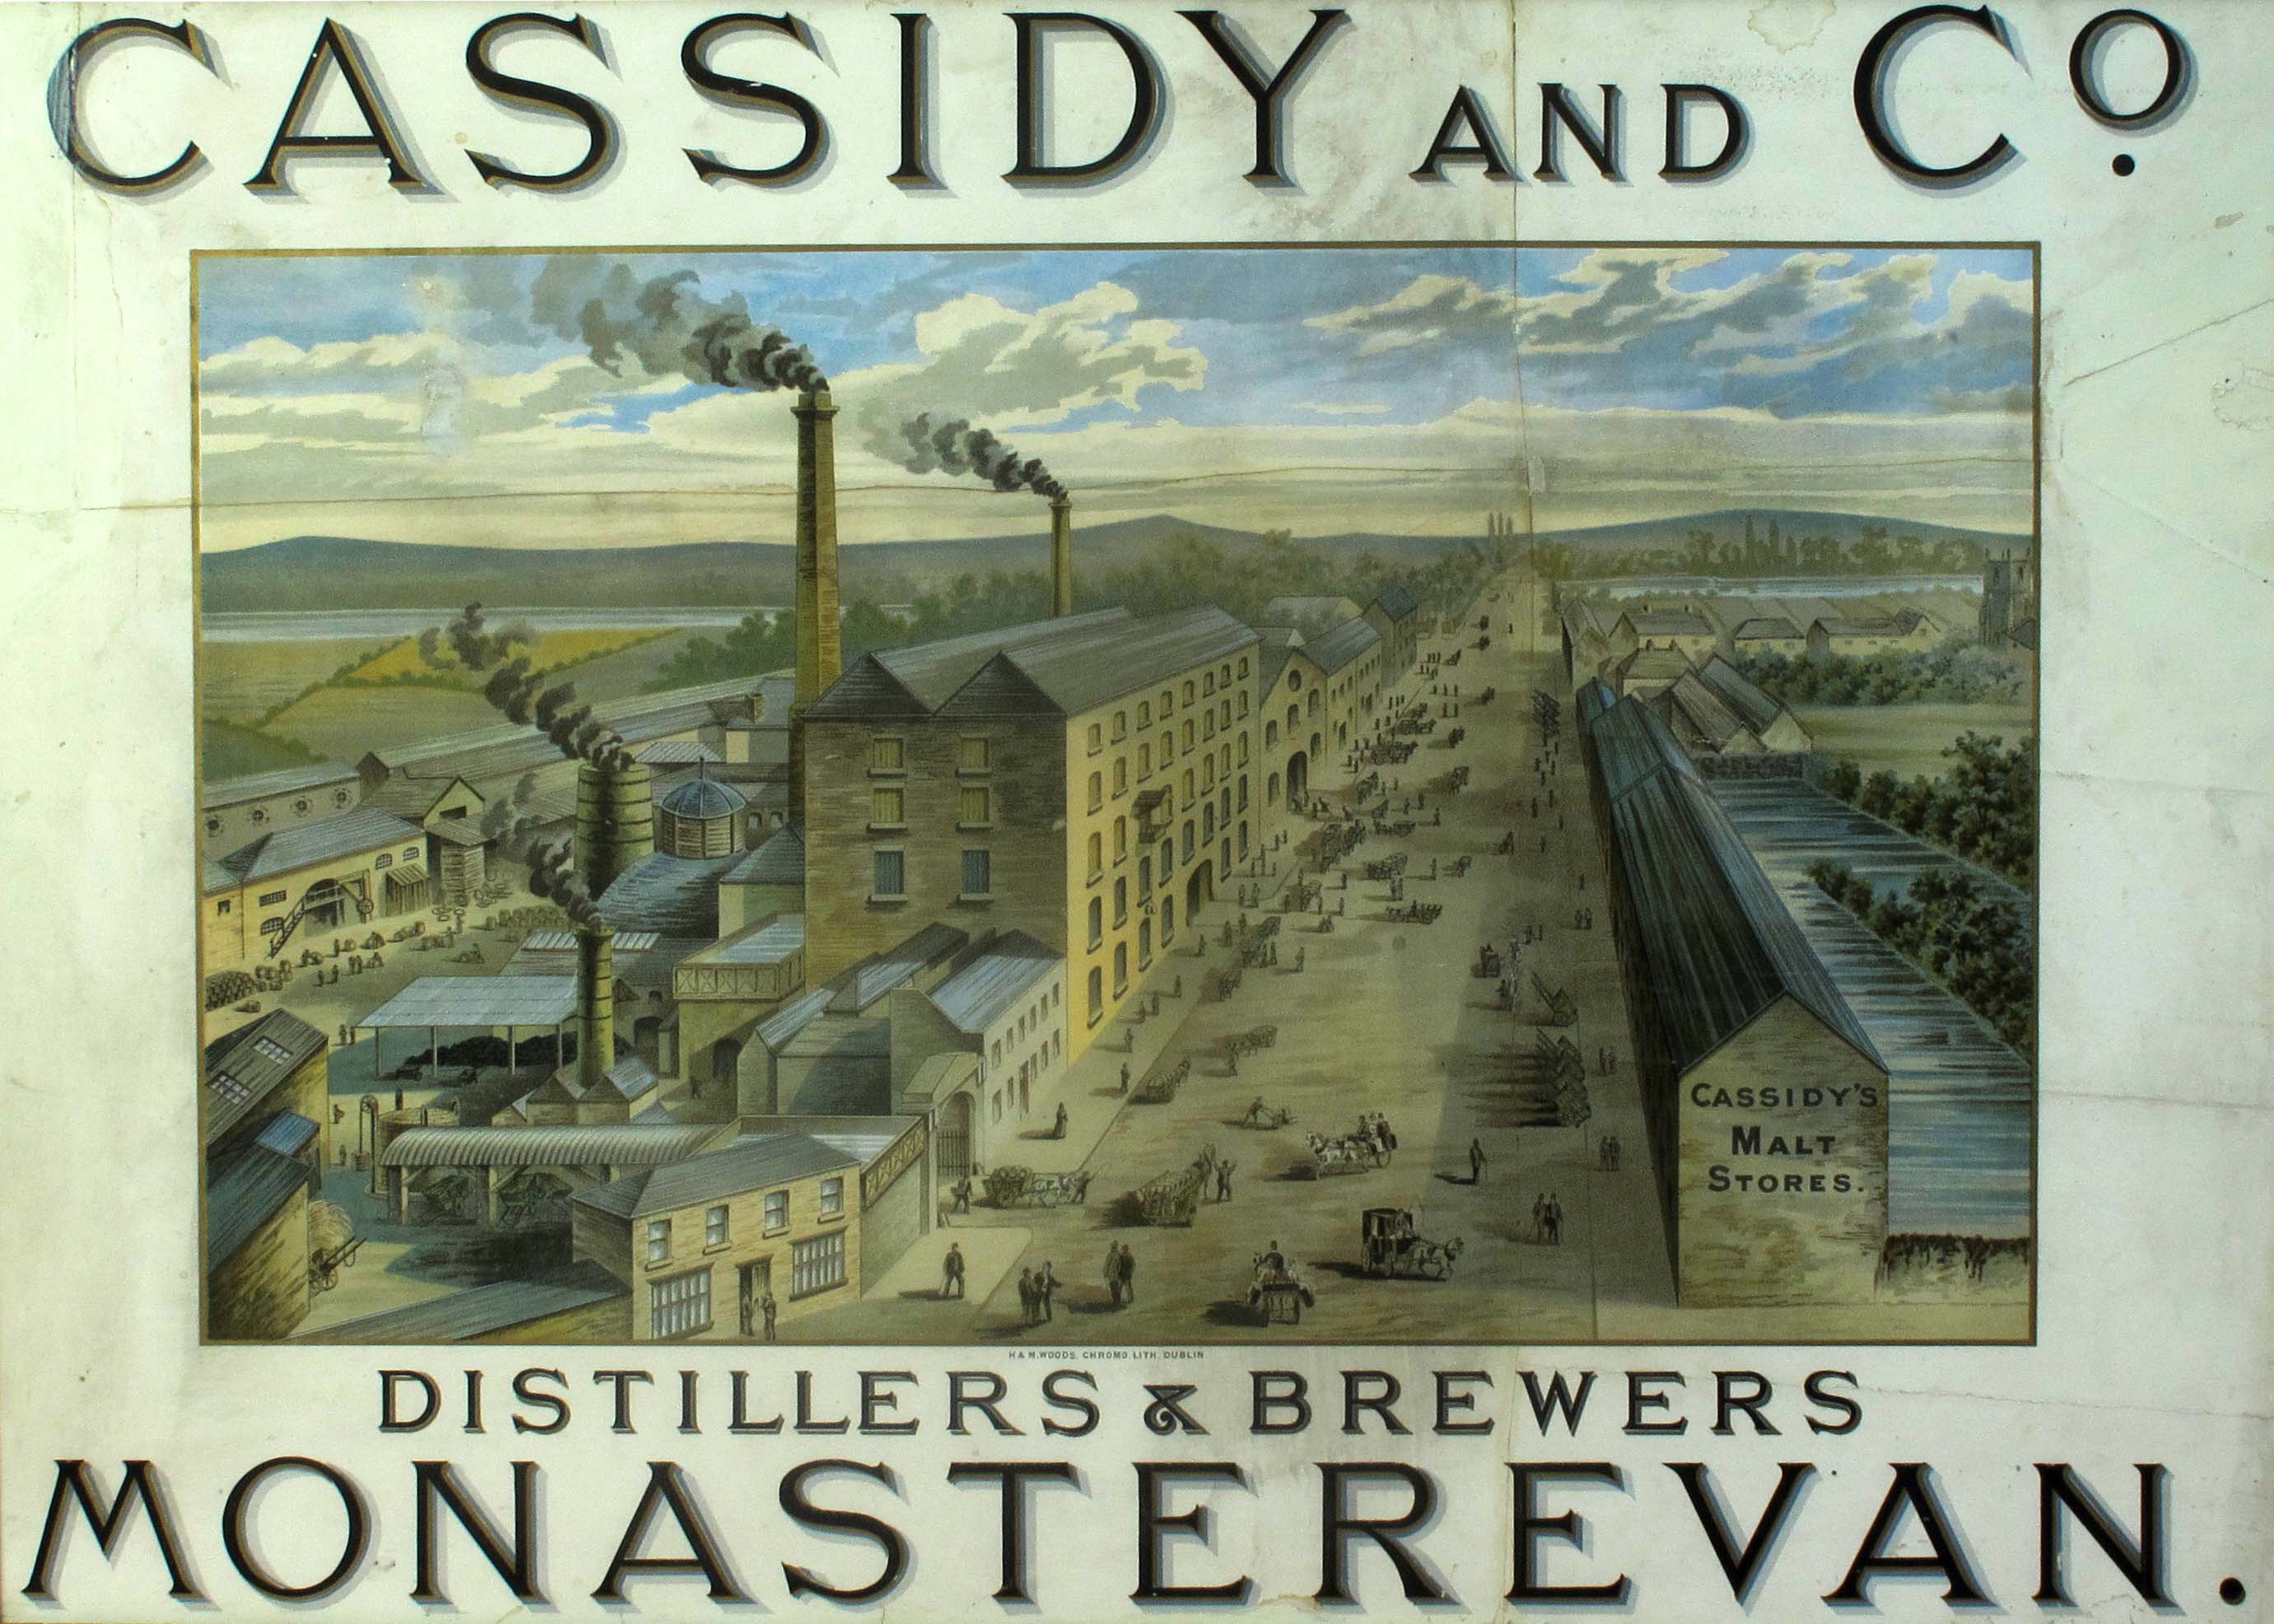 Circa 1920 Whiskey advertising poster. Cassidy & Co.